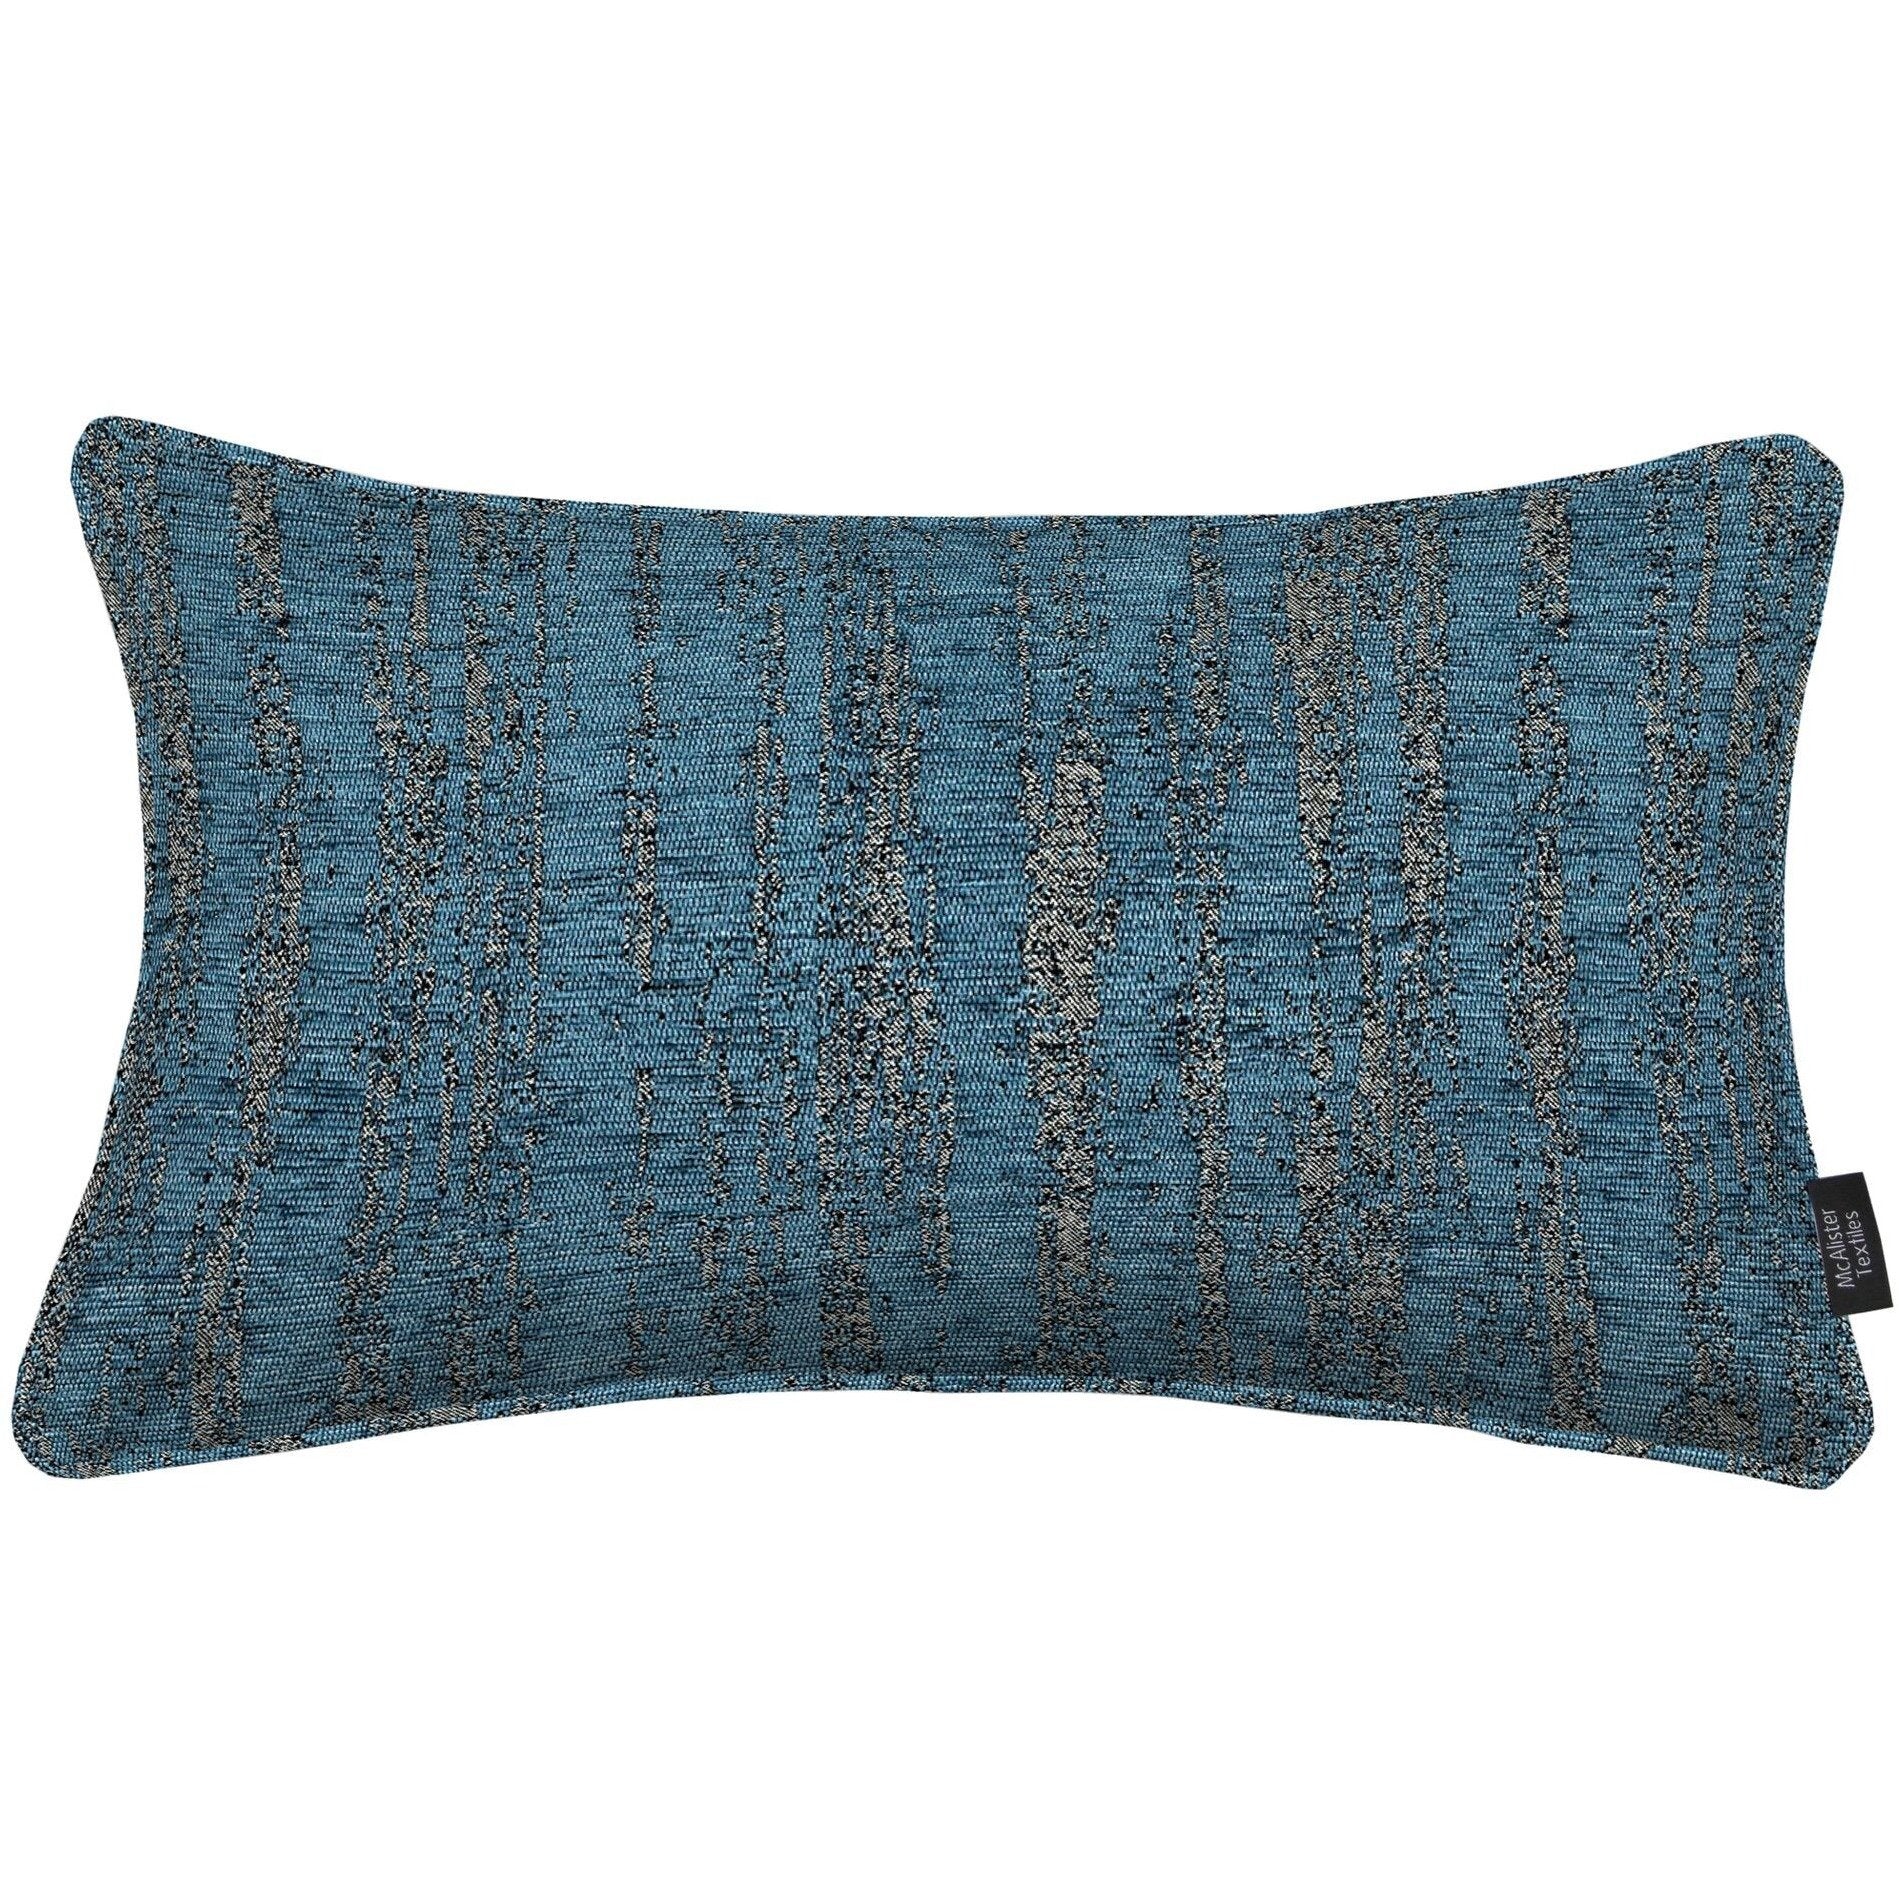 McAlister Textiles Textured Chenille Denim Blue Cushion Cushions and Covers Cover Only 50cm x 30cm 